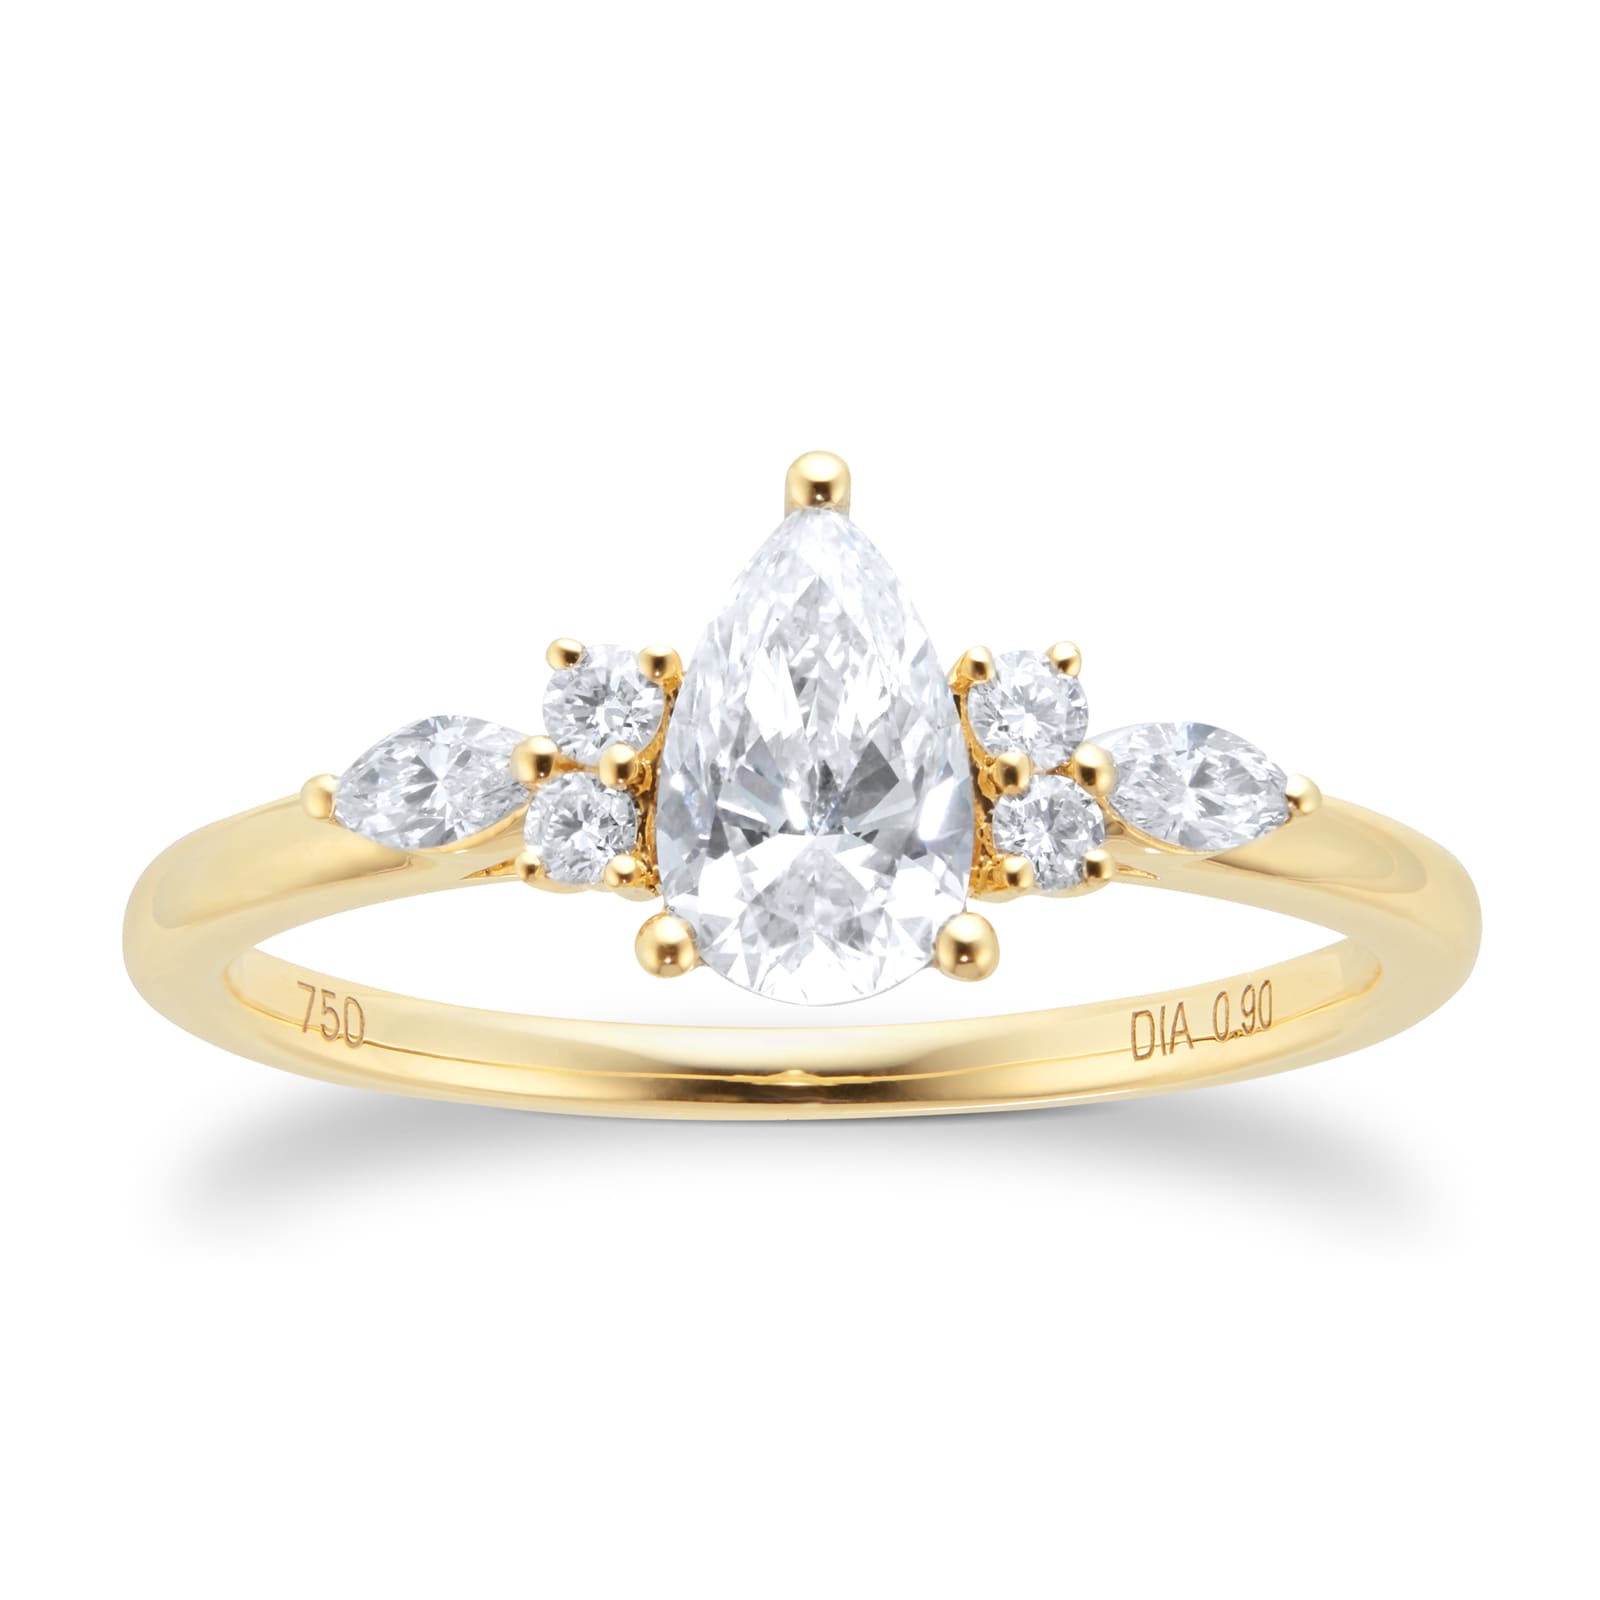 18ct Yellow Gold 0.90cttw Diamond Pear Scatter Engagement Ring - Ring Size O